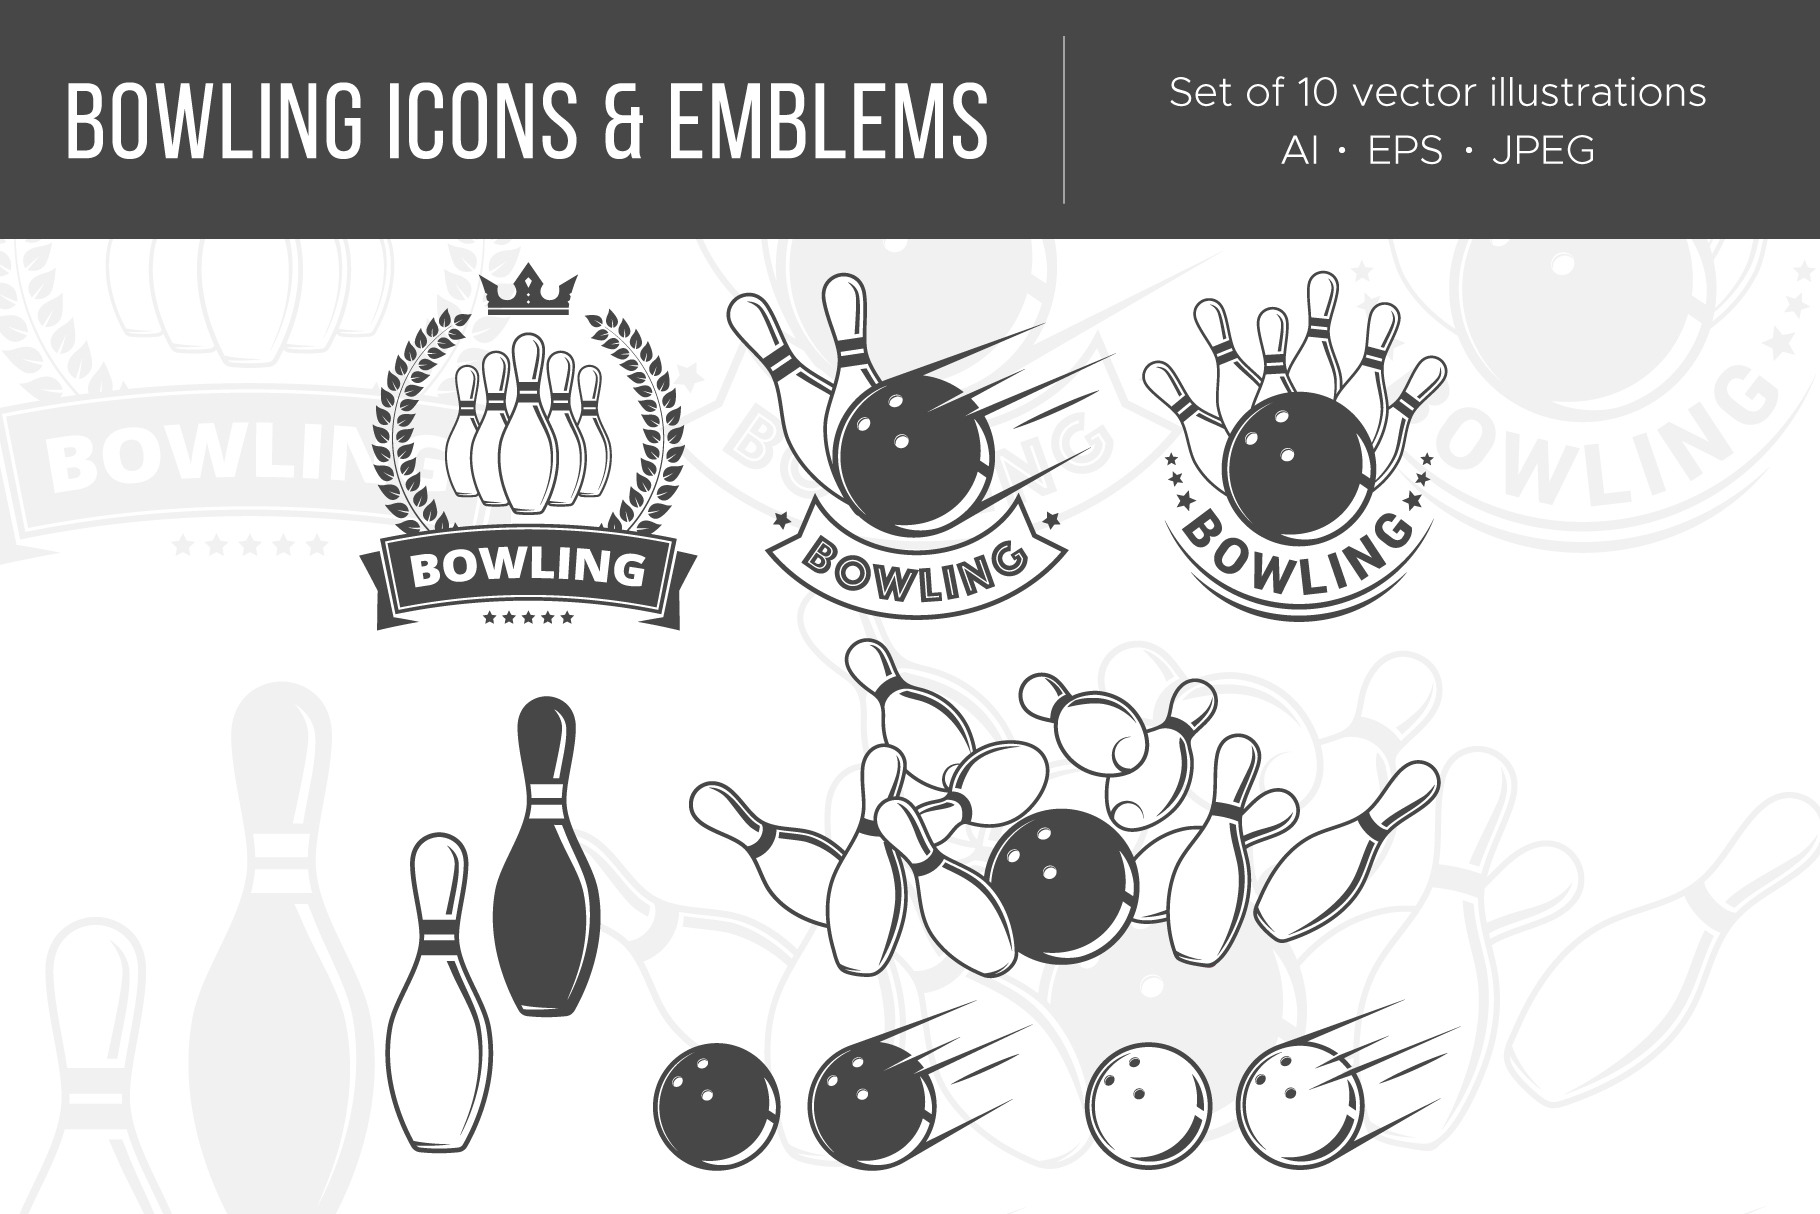 Bowling objects and emblems | Object Illustrations ~ Creative Market